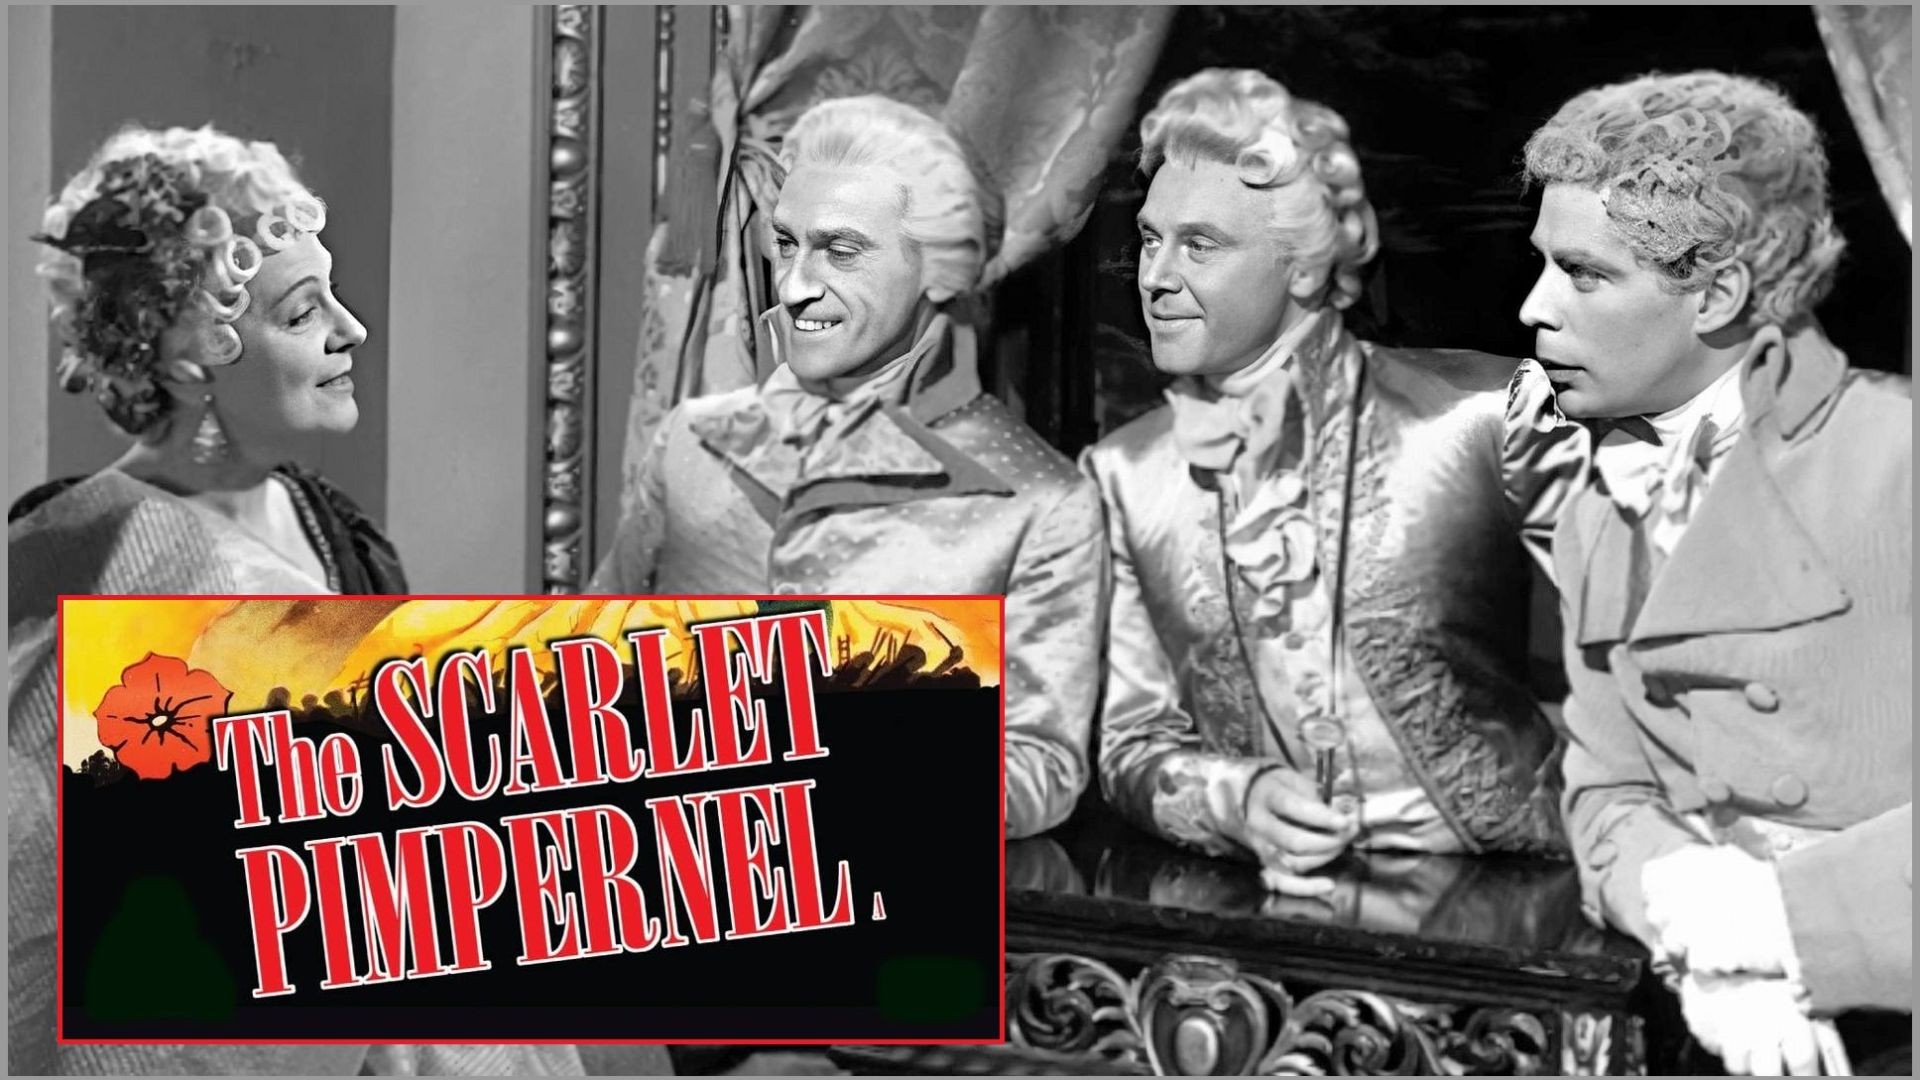 The Scarlet Pimpernel -  Sir Andrew’s Fate